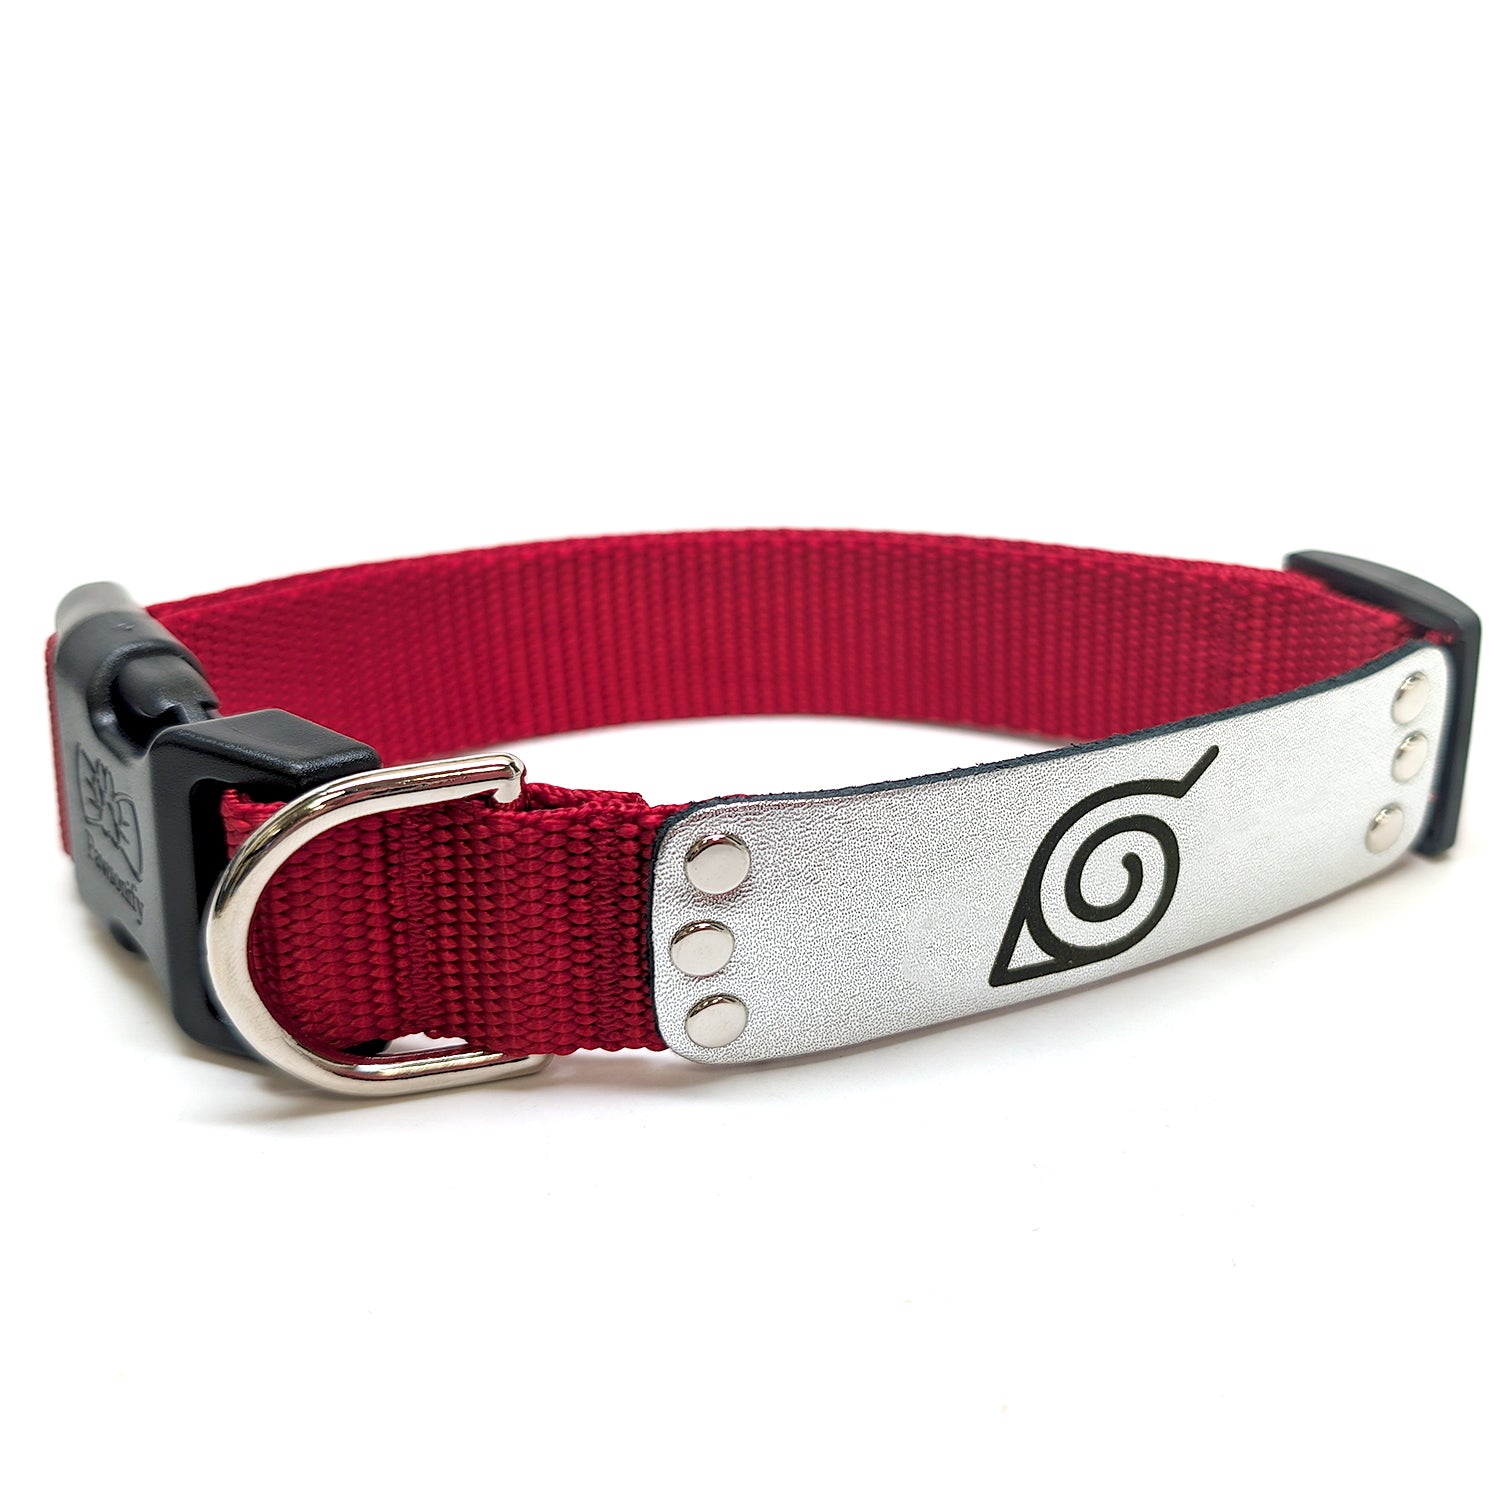 Naruto Shippuden x Pawsonify - Officially Licensed Ninja Collar (Red) for Medium Dogs #size_Dog: (M) 15-20